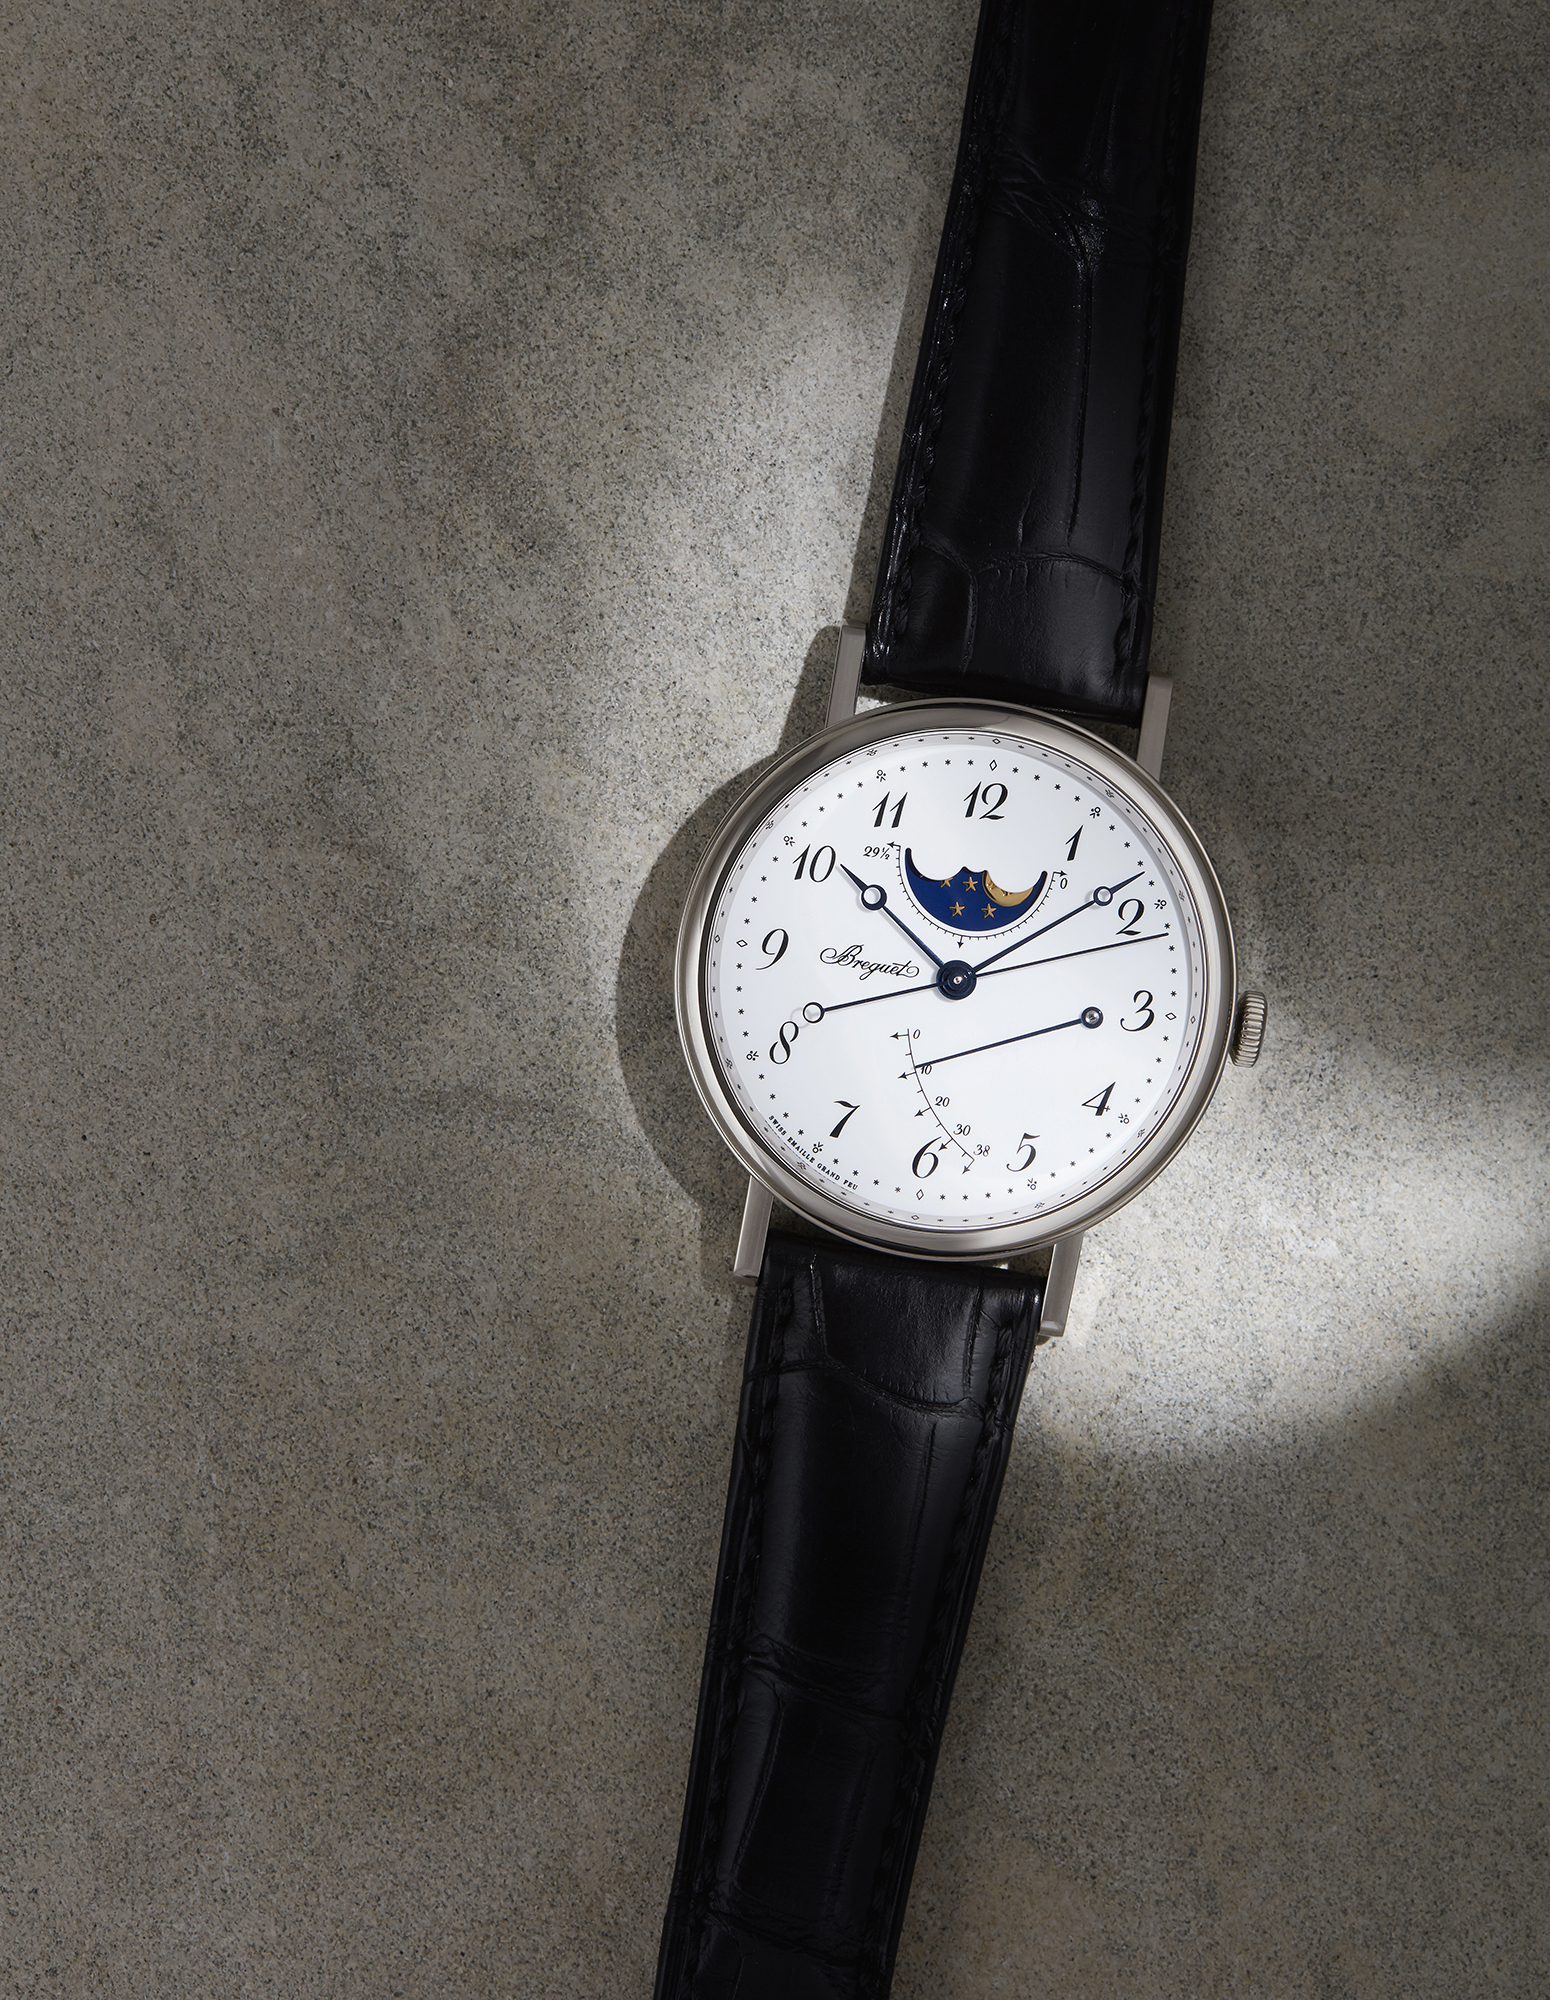 Classique Moon Phase 7787 with 18ct white gold case, £22,700, BREGUET